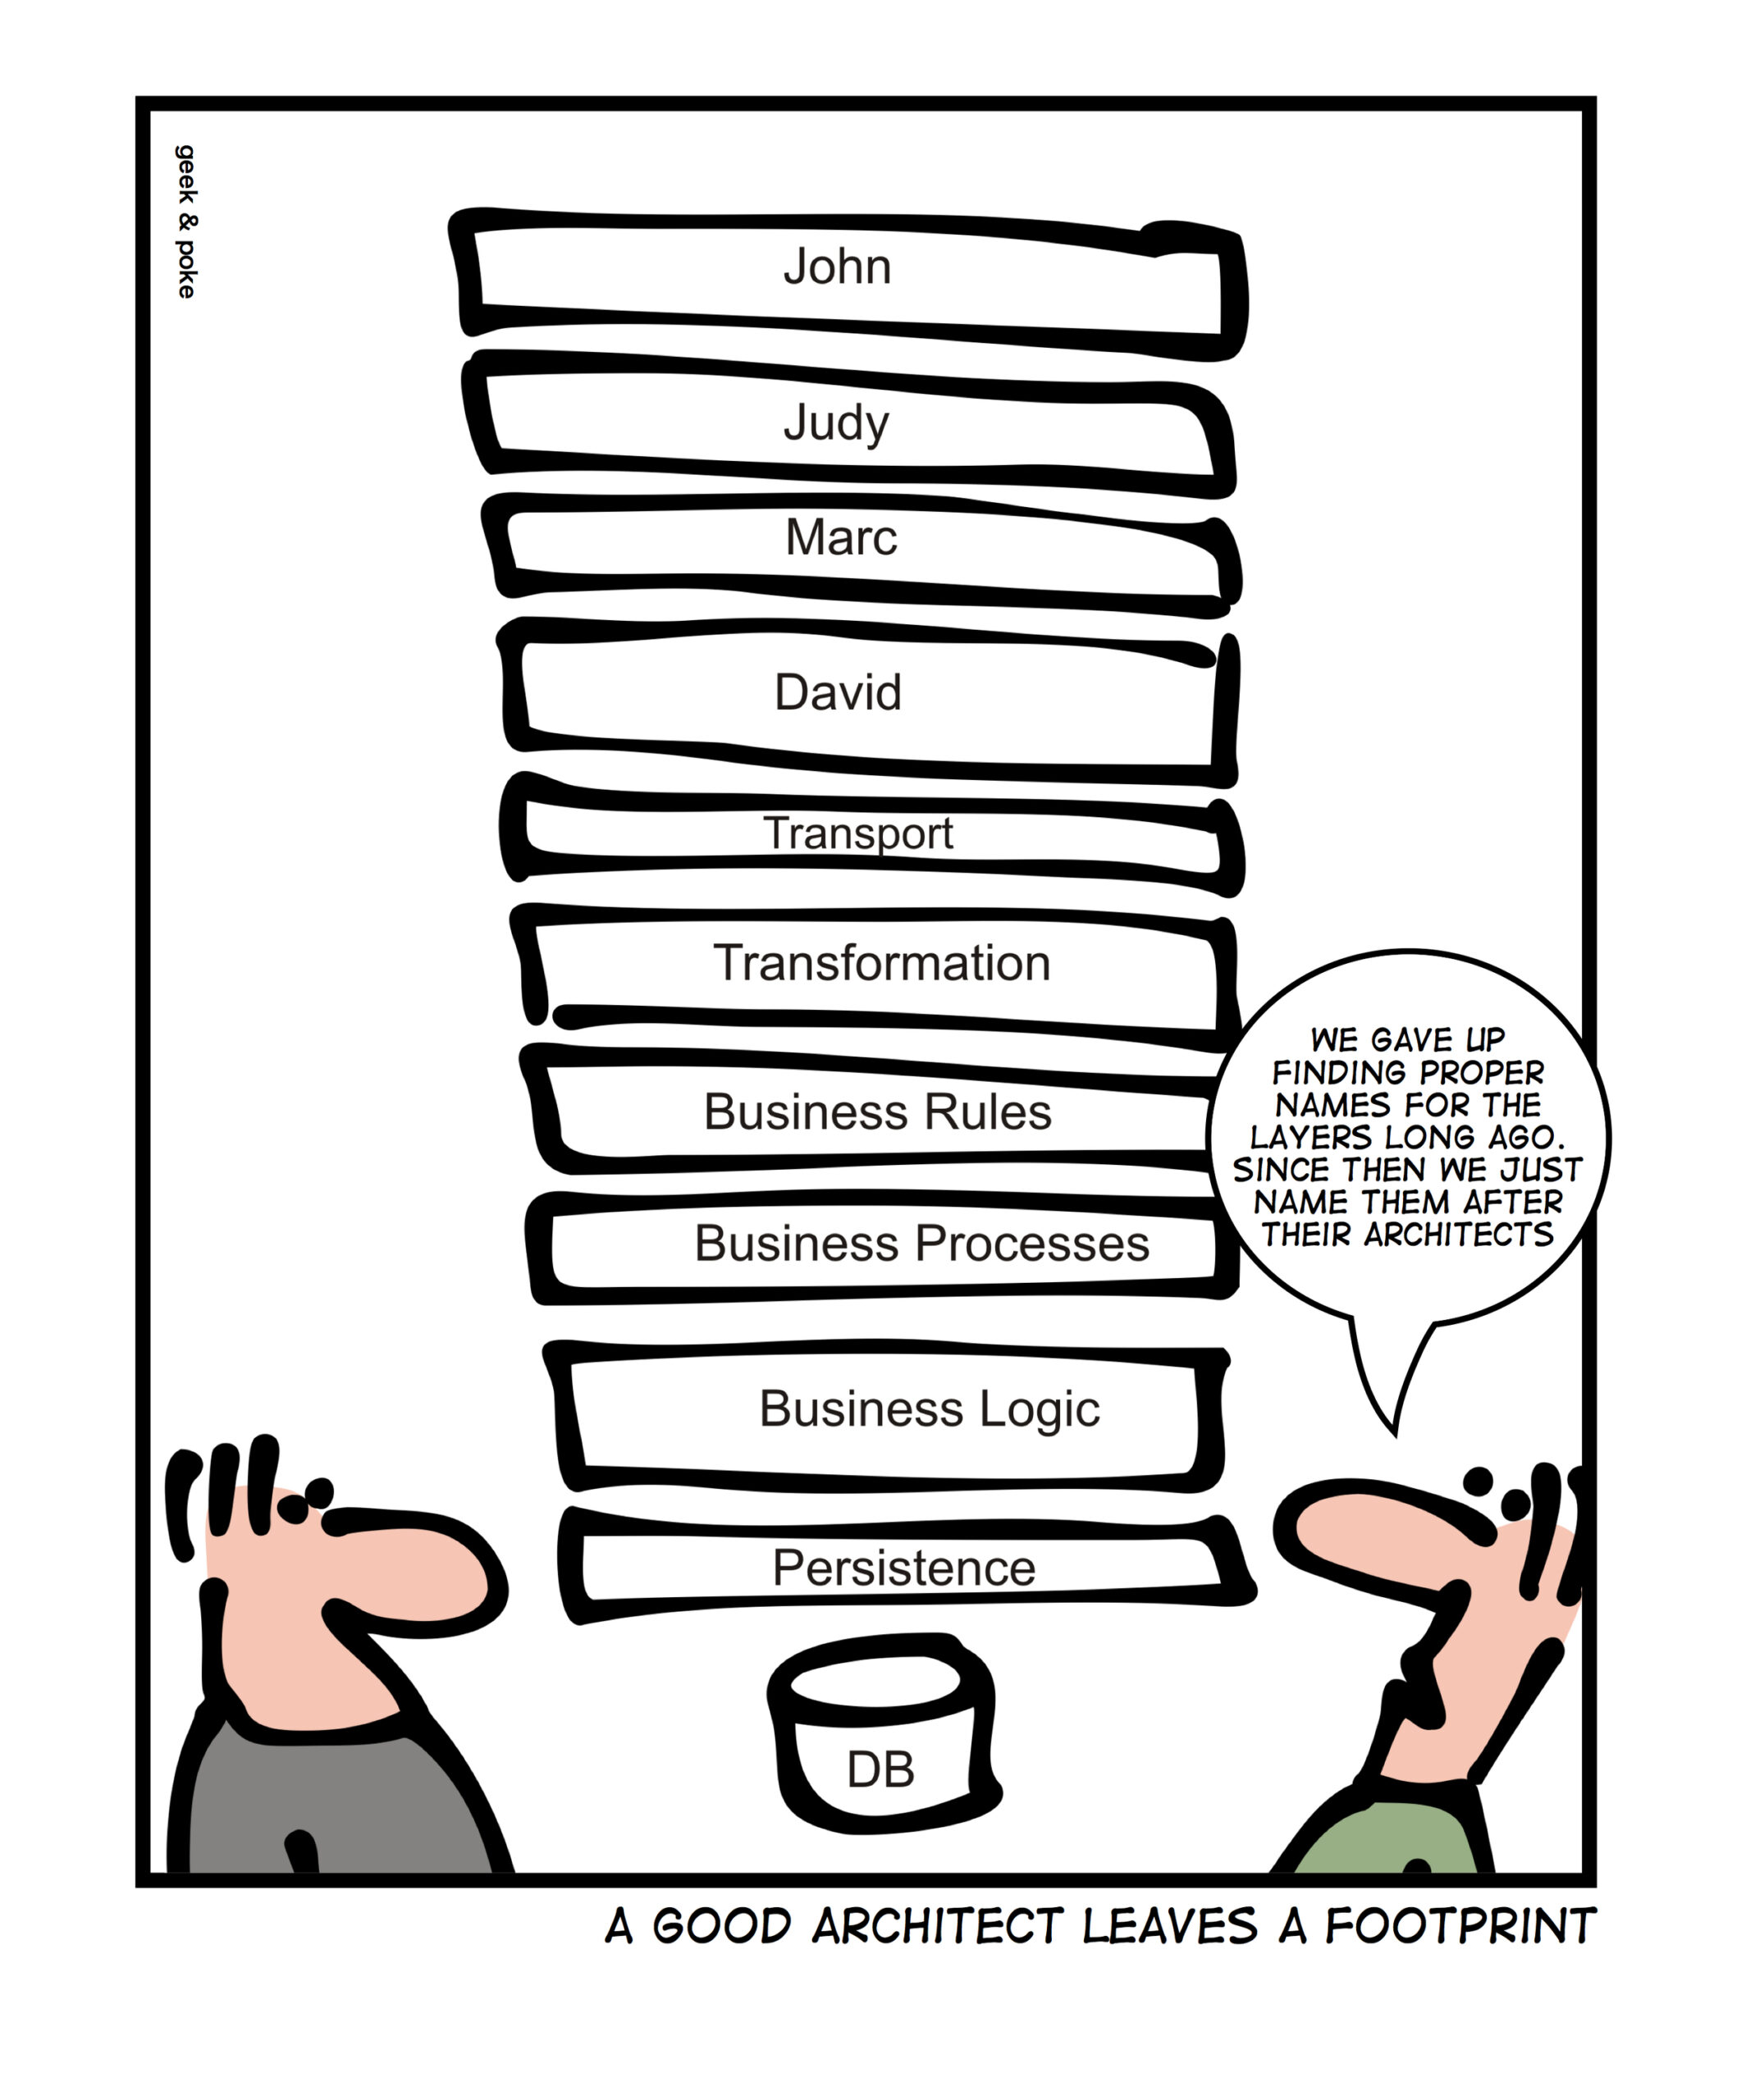 a geek & poke single-panel comic titled 'A GOOD ARCHITECT LEAVES A FOOTPRINT', showing a vertical list above a database, going from 'persistence', 'business logic', business logic', 'business processes' to 'Marc', 'Judy' and 'John'. Two characters are looking at the list and one says: 'We gave up finding proper names for the layers long ago, since then we just name them after their architects'